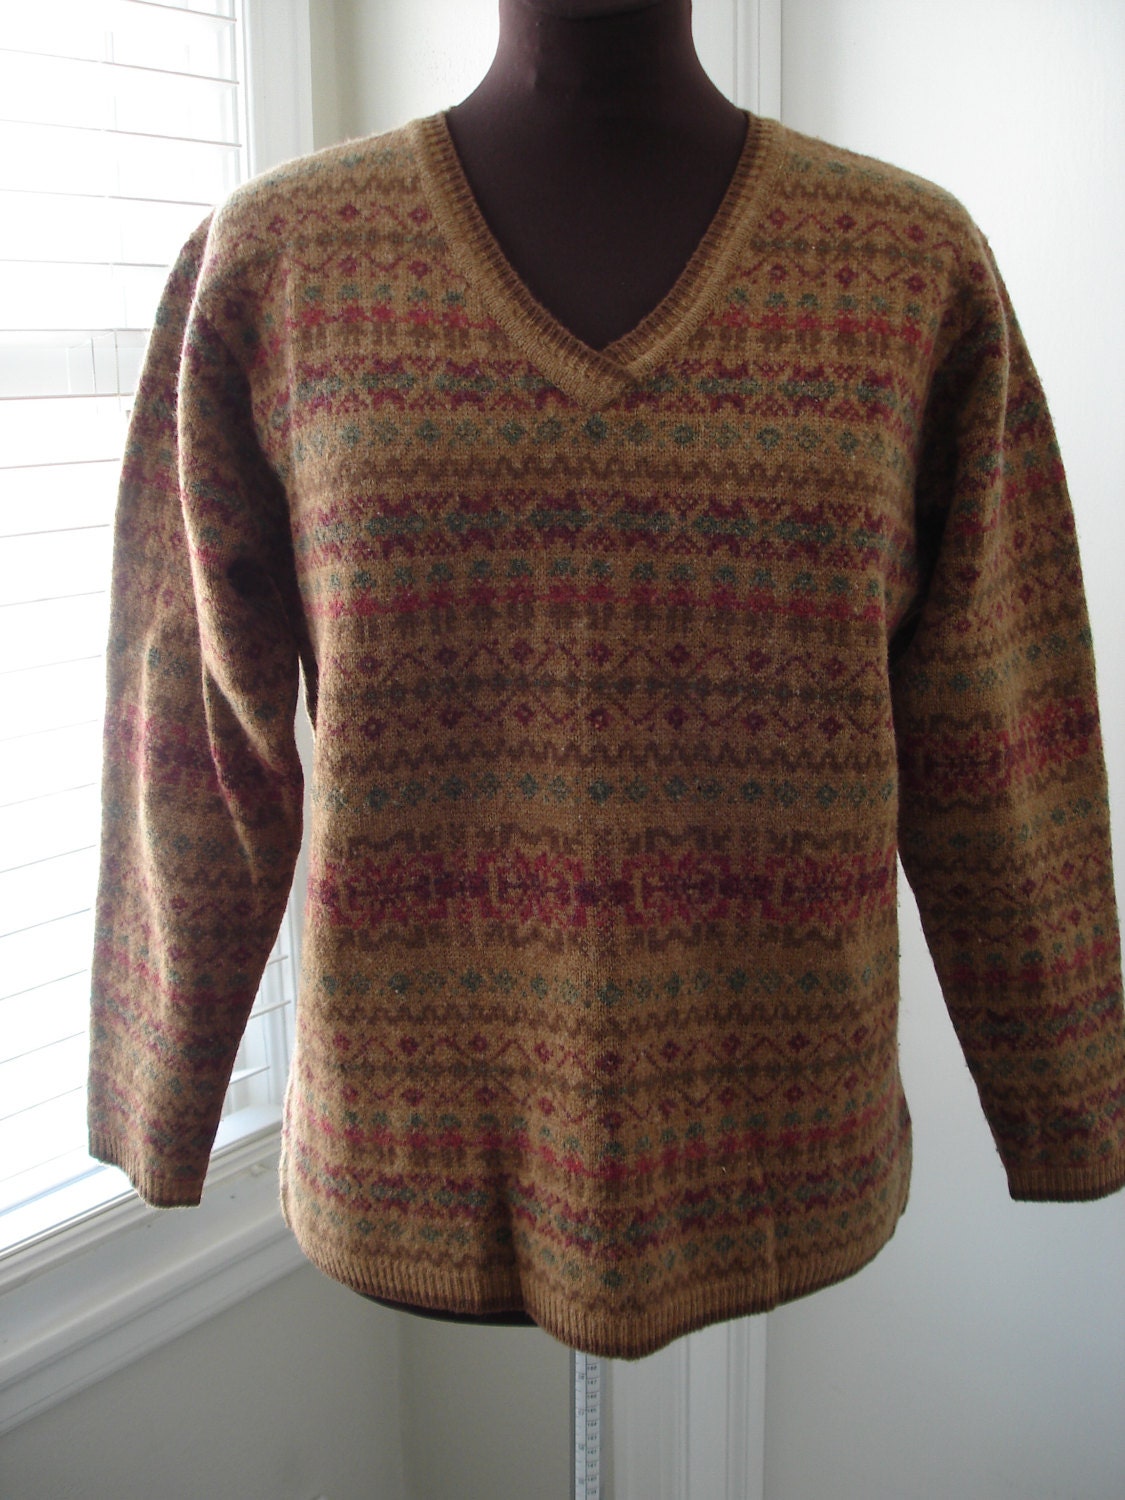 Vintage Woolrich Tan Sweater with Aztec Pattern 36 Bust